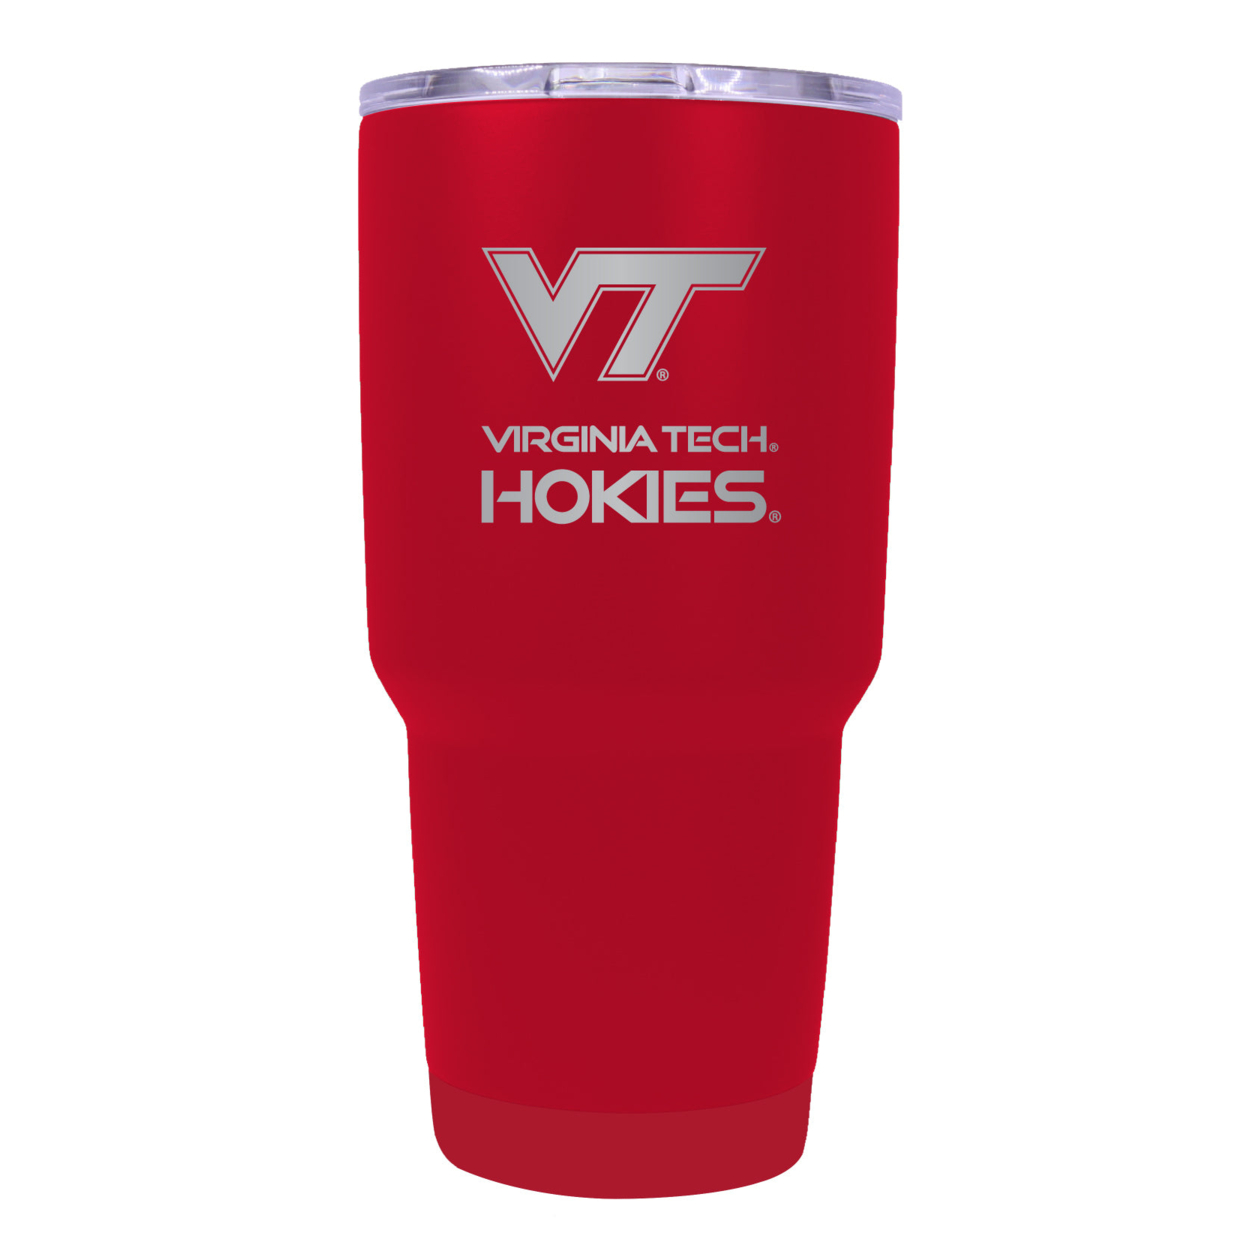 Virginia Tech Hokies 24 Oz Insulated Tumbler Etched - Choose Your Color - Red